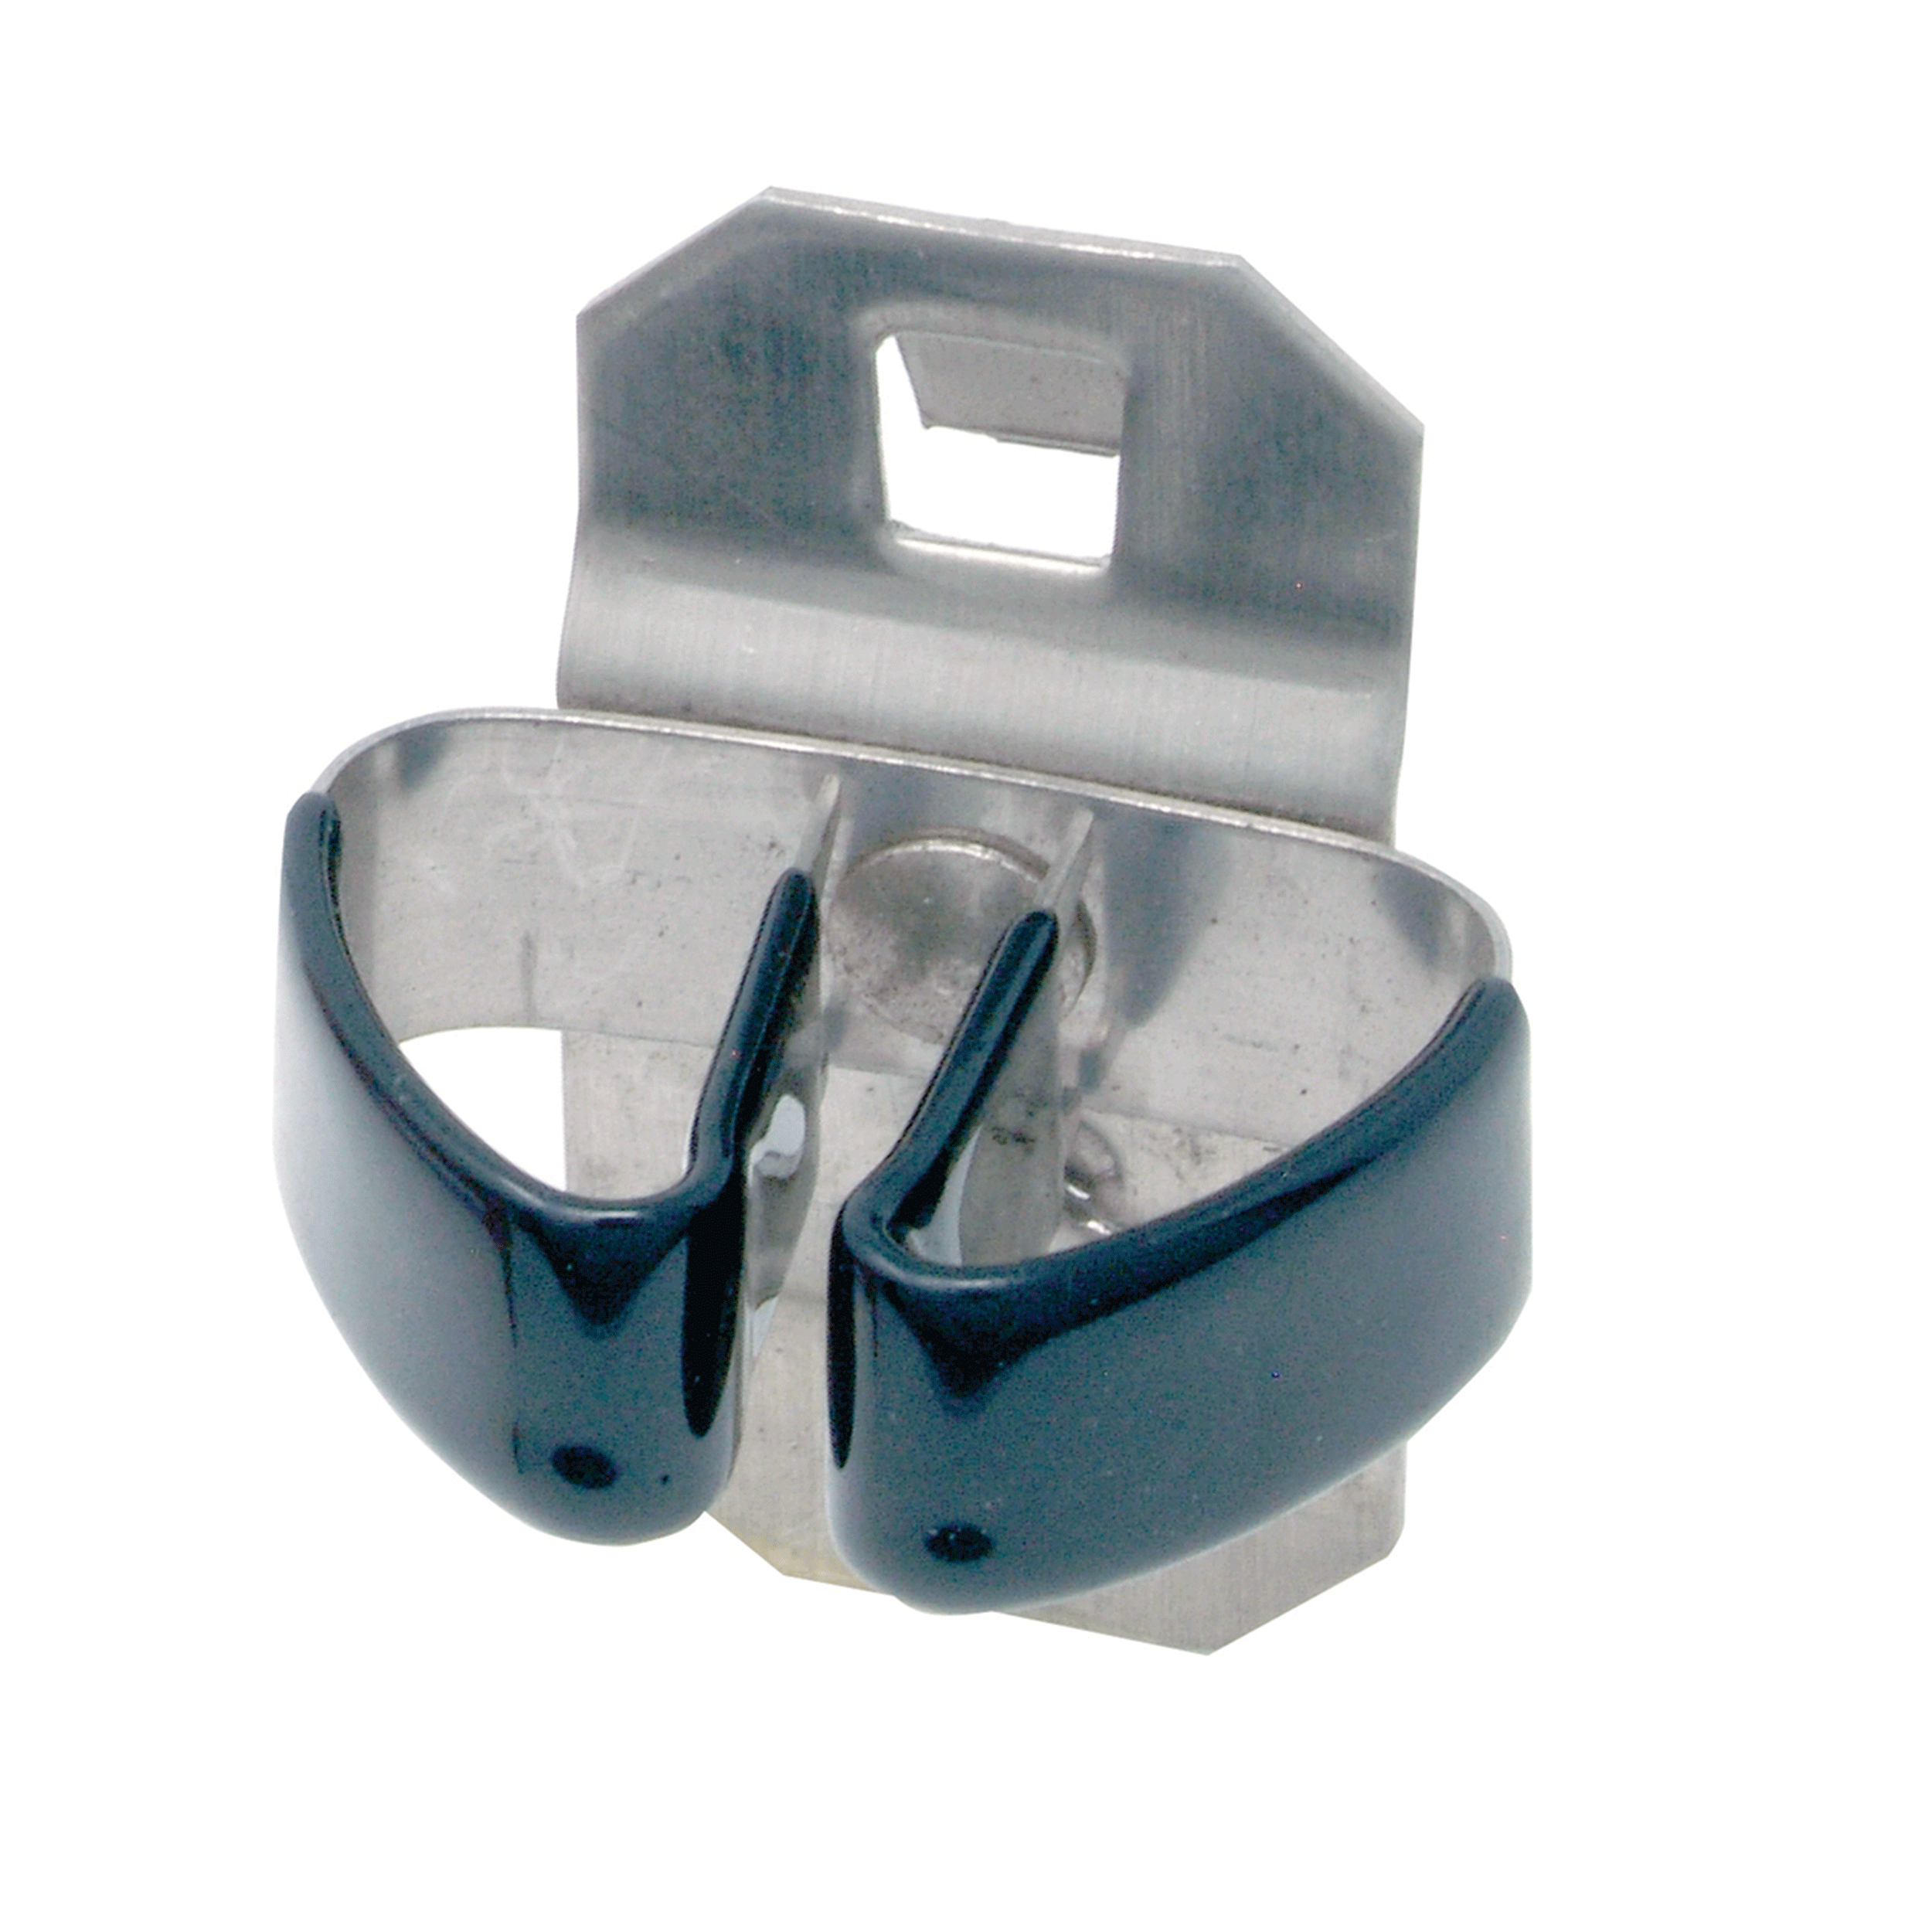 1/4 In. To 1/2 In. Hold Range 2-3/4 In. Proj. Vinyl Dipped Stainless Steel Standard Spring Clip For Ss Locboard, 3 Pack